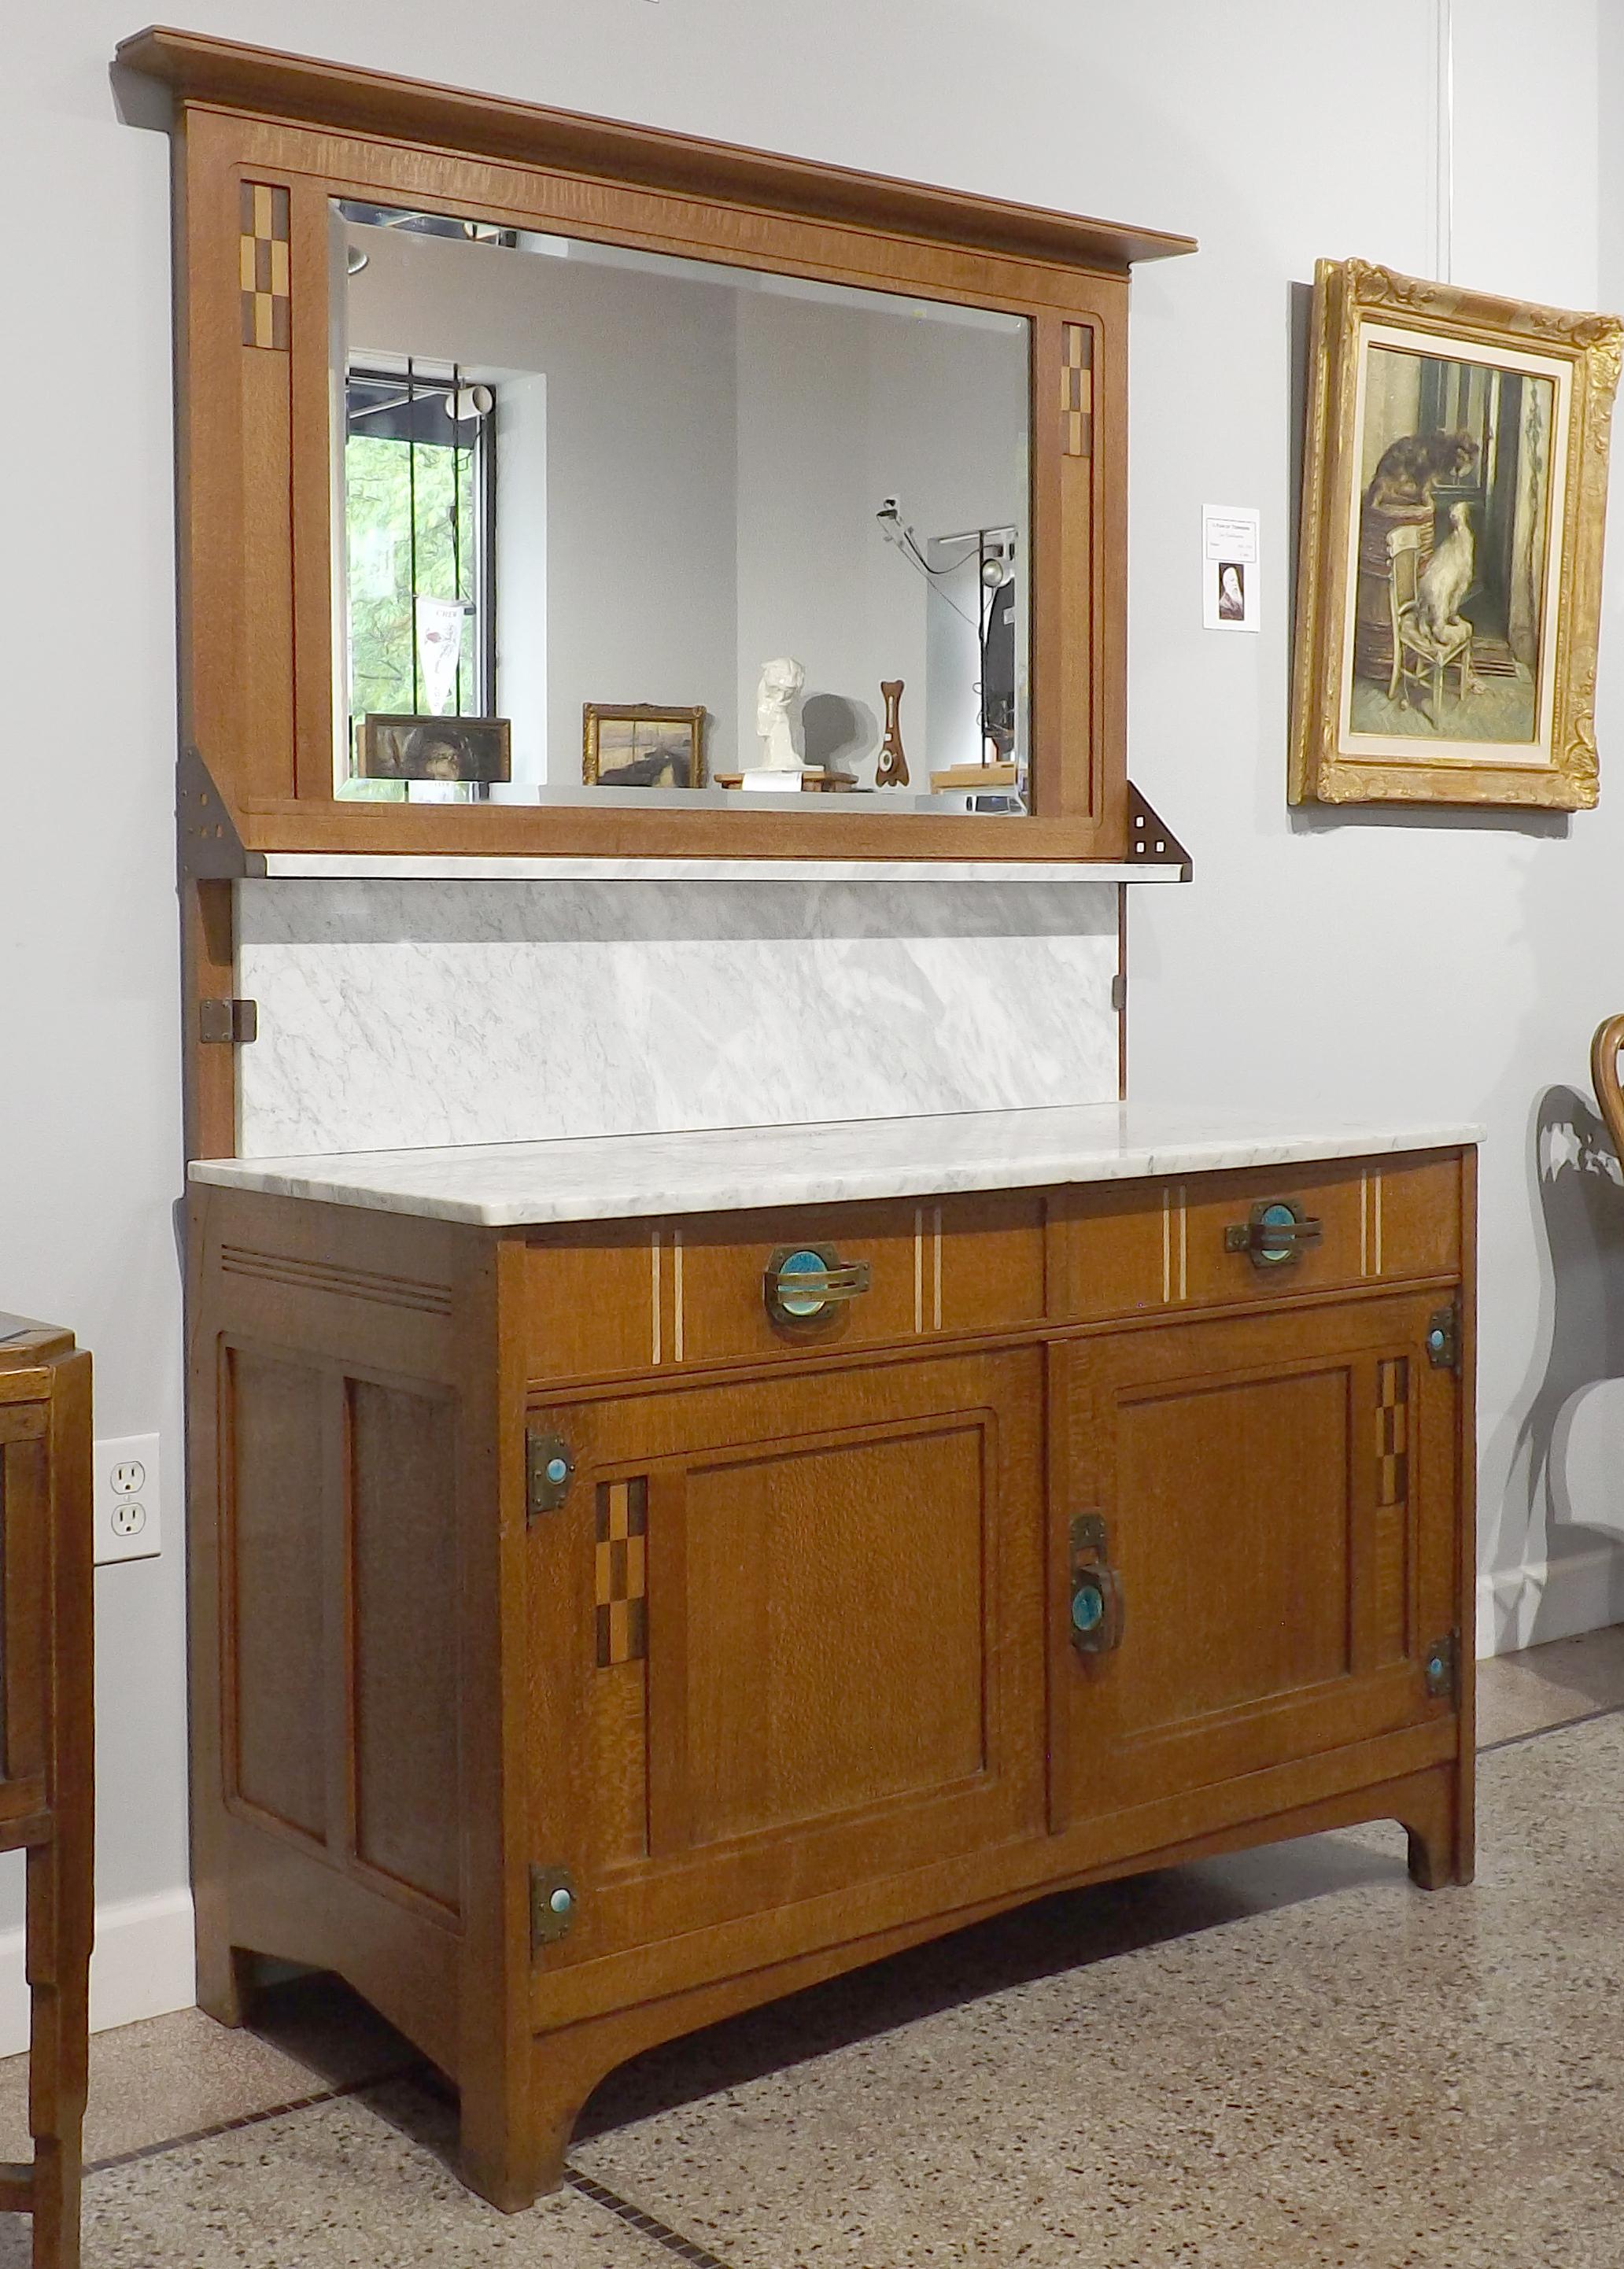 A stunning marble top vanity by the Belgian designer Gustave Serrurier-Bovy, with copper hardware and blue-green enameled medallions. A checkerboard pattern flanks the beautiful beveled mirror. Works by Serrurier-Bovy can be found in many museums